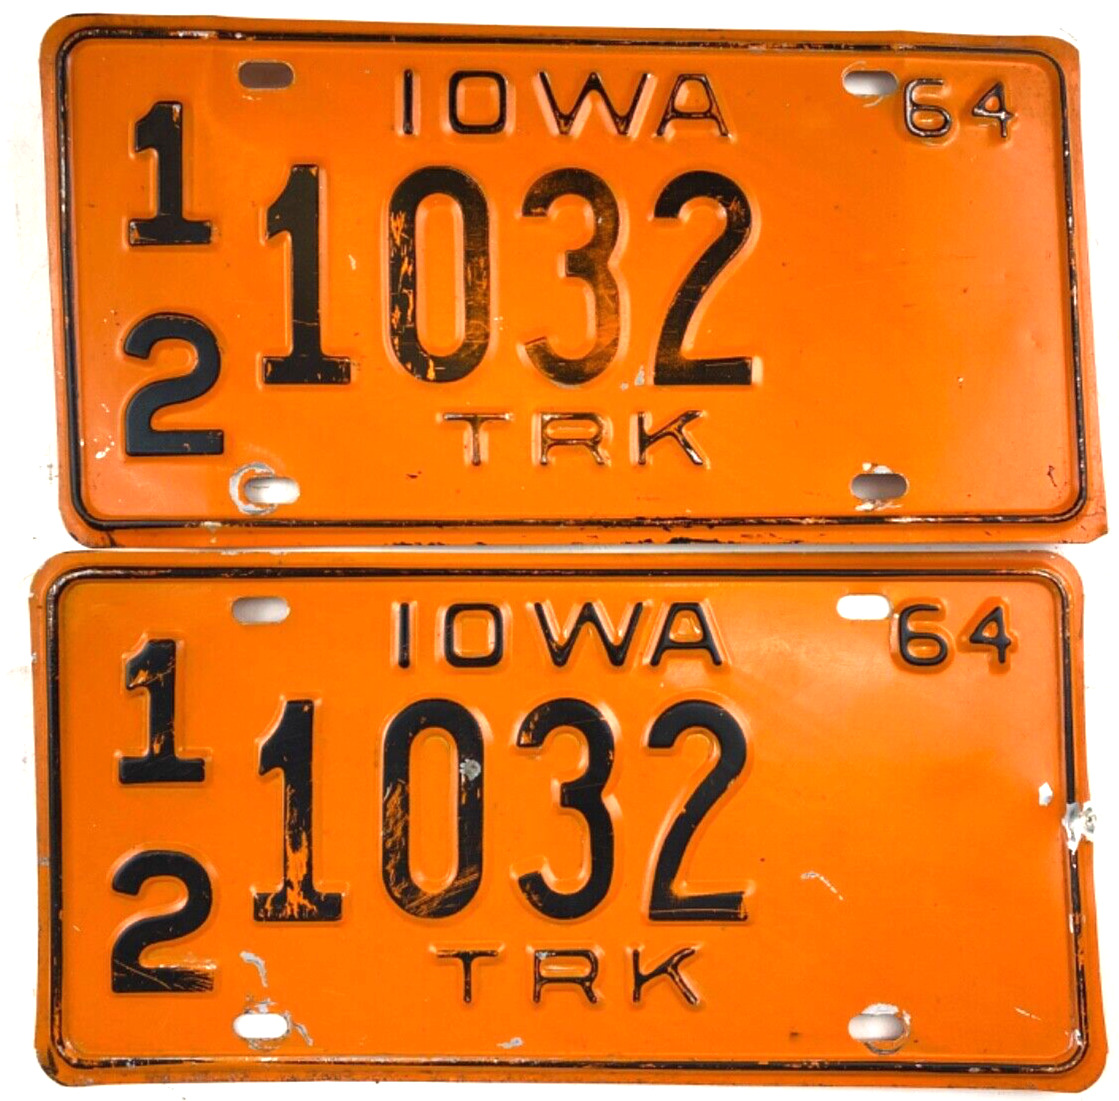 Iowa Truck 1964 Old License Plate Set Butler Co. Man Cave Decor Wall Collector